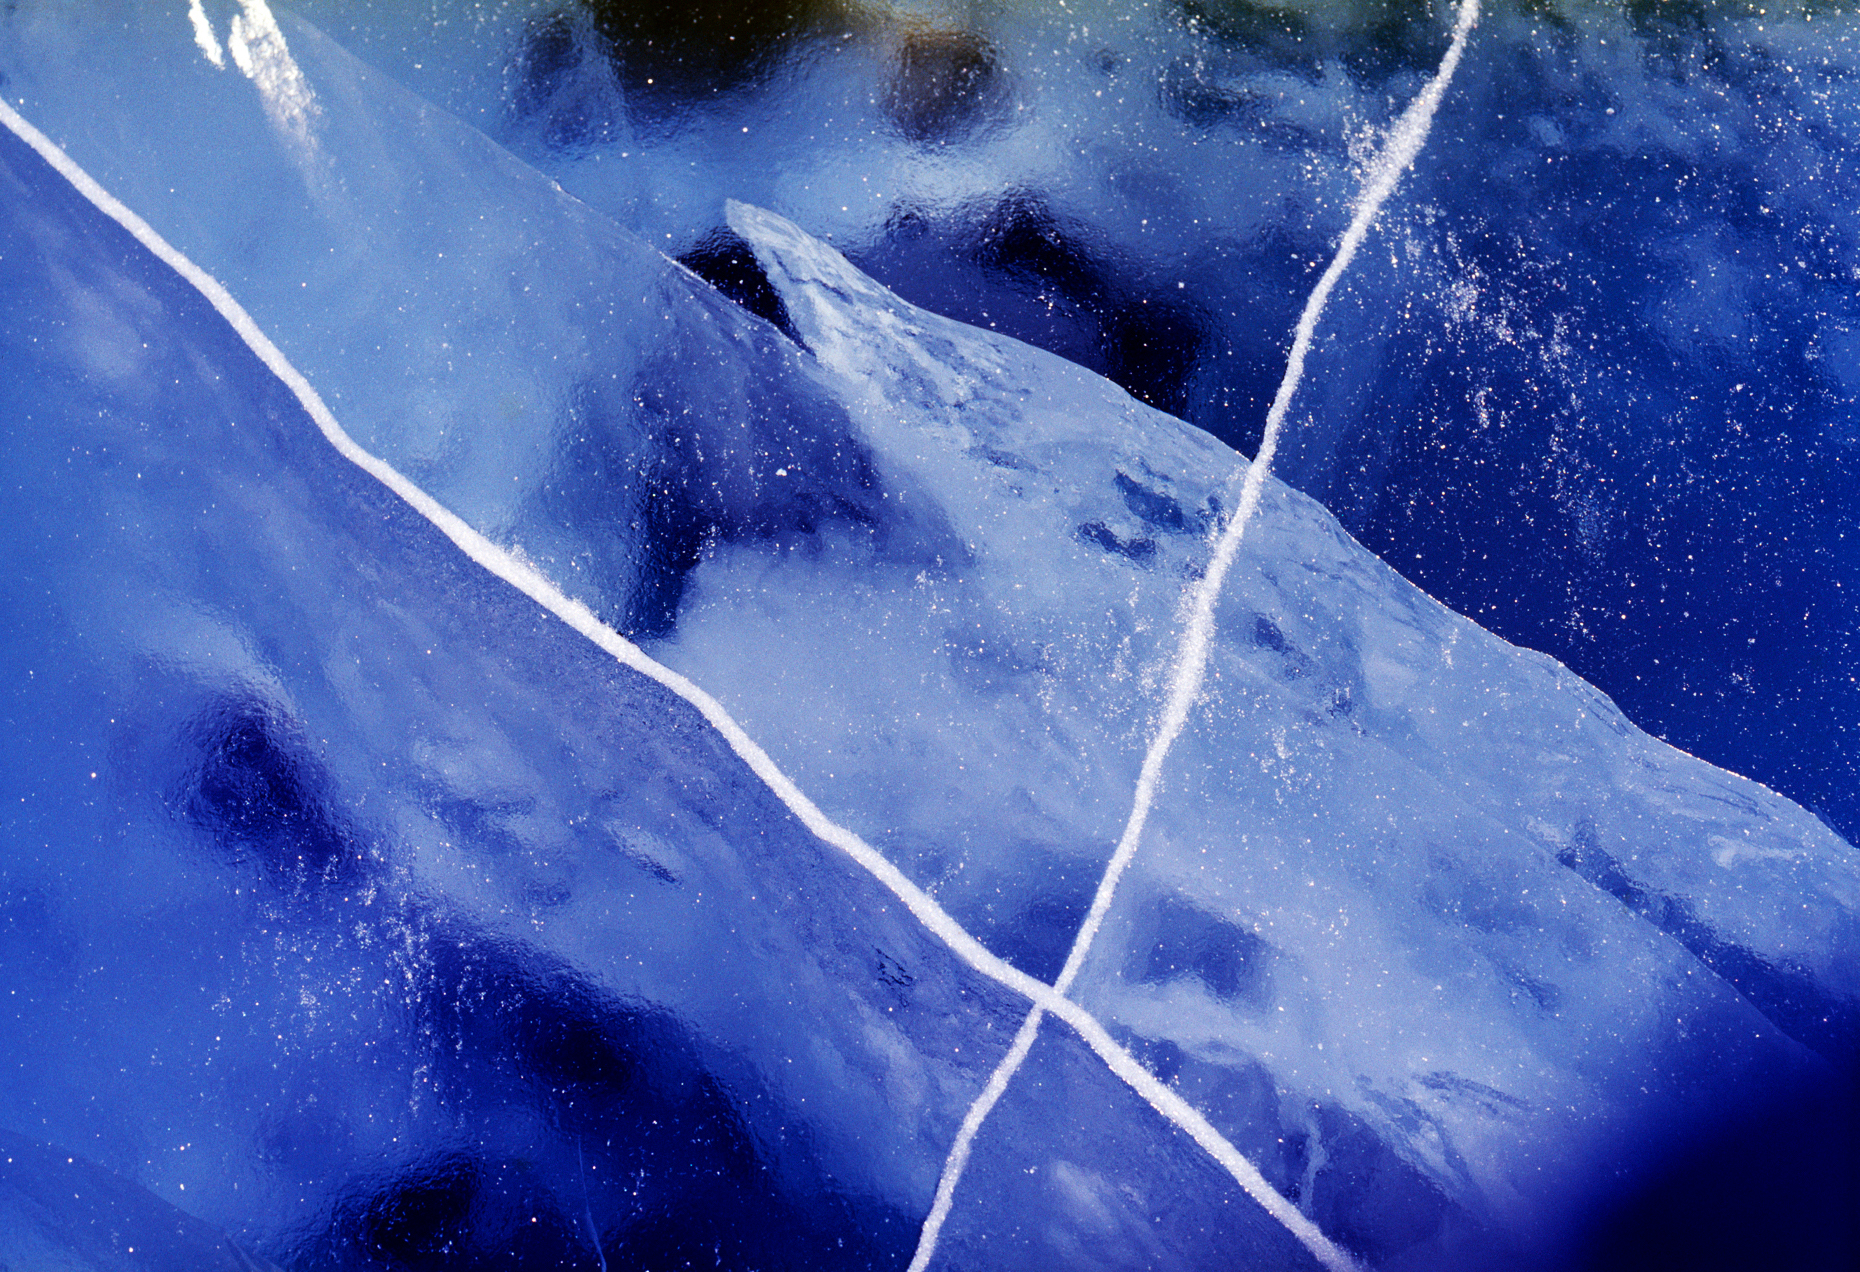 Abstract patterns in the clear blue ice of the Soper River, Baff